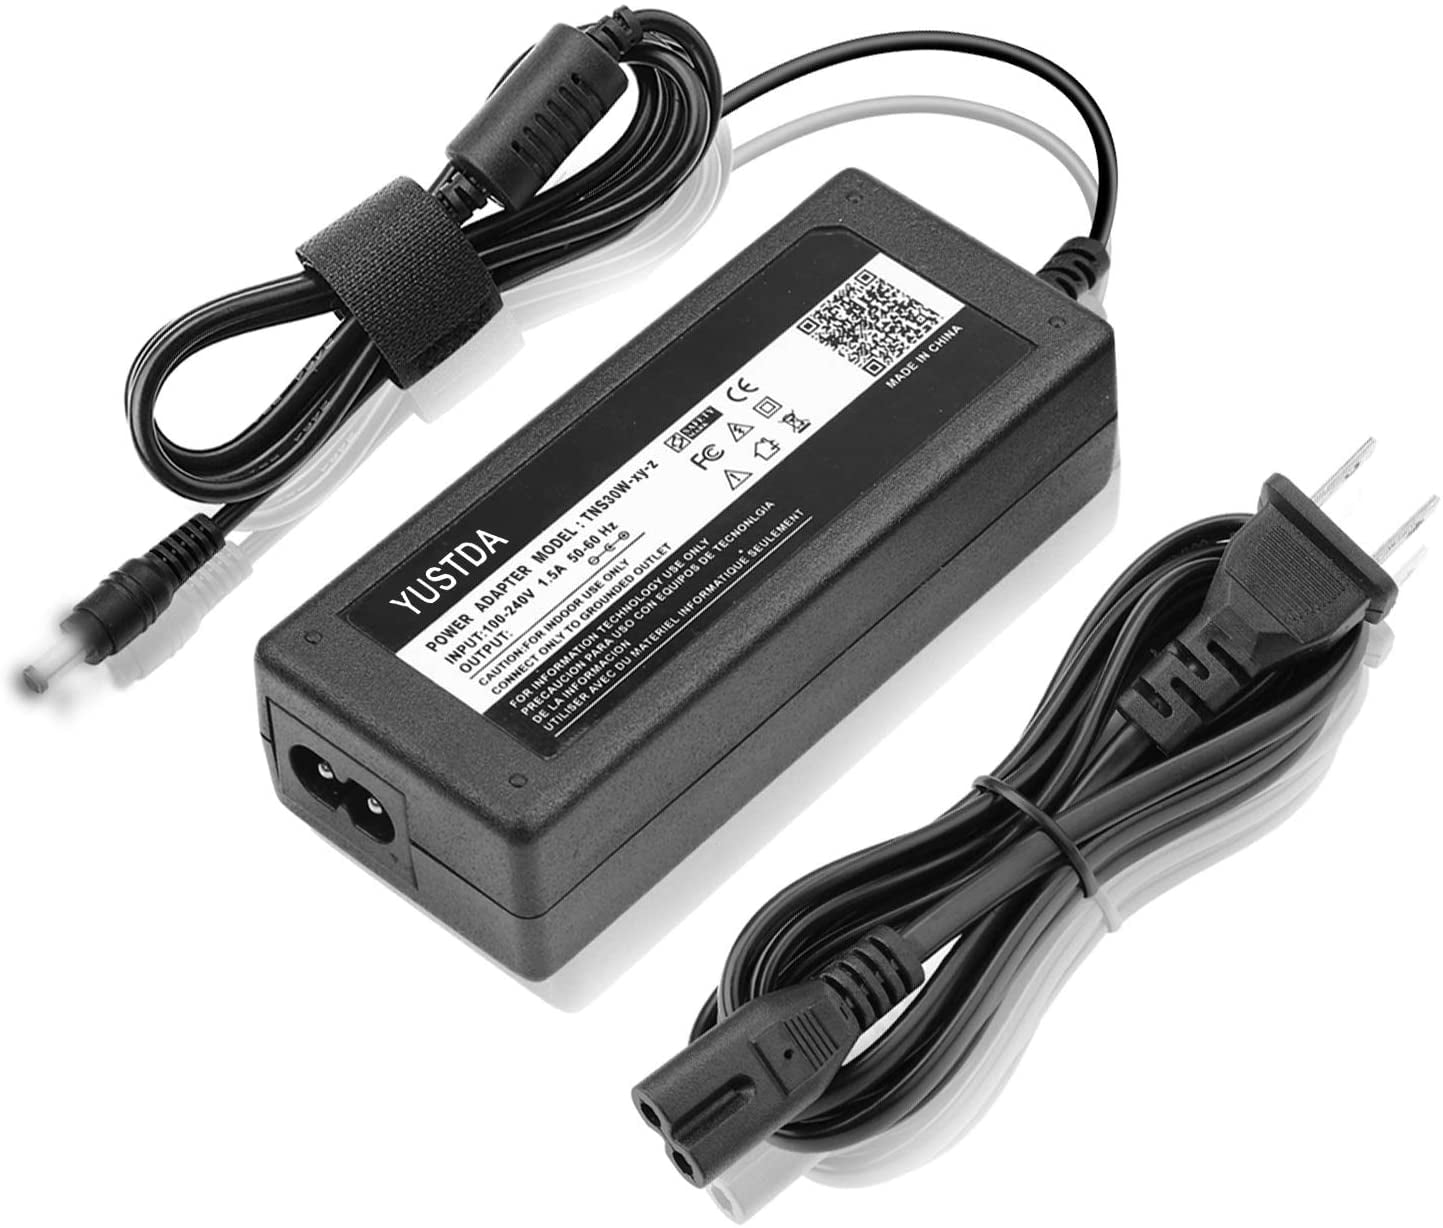 NEW Lot of 2 Multi-Link AC Adapter AA-121A Charger Power Supply Cord 